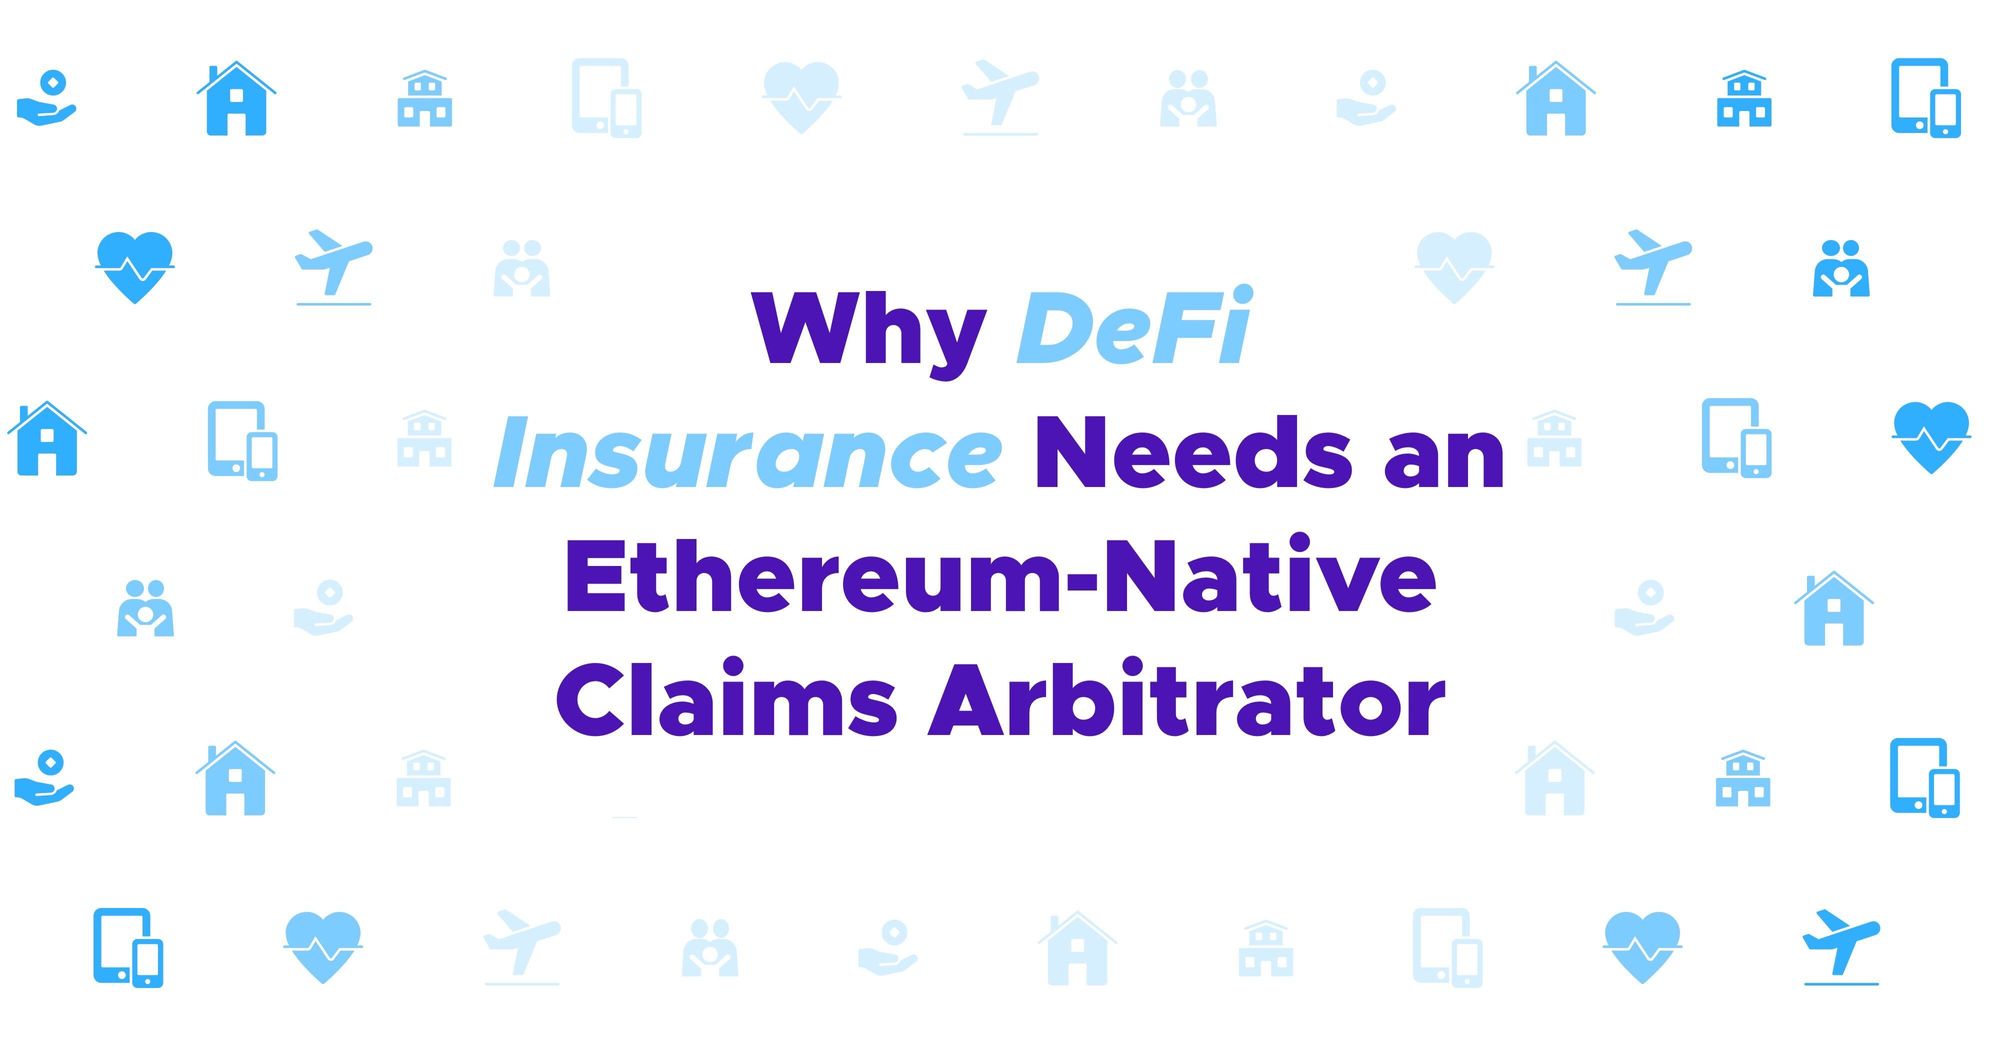 Why DeFi Insurance Needs an Ethereum-Native Claims Arbitrator